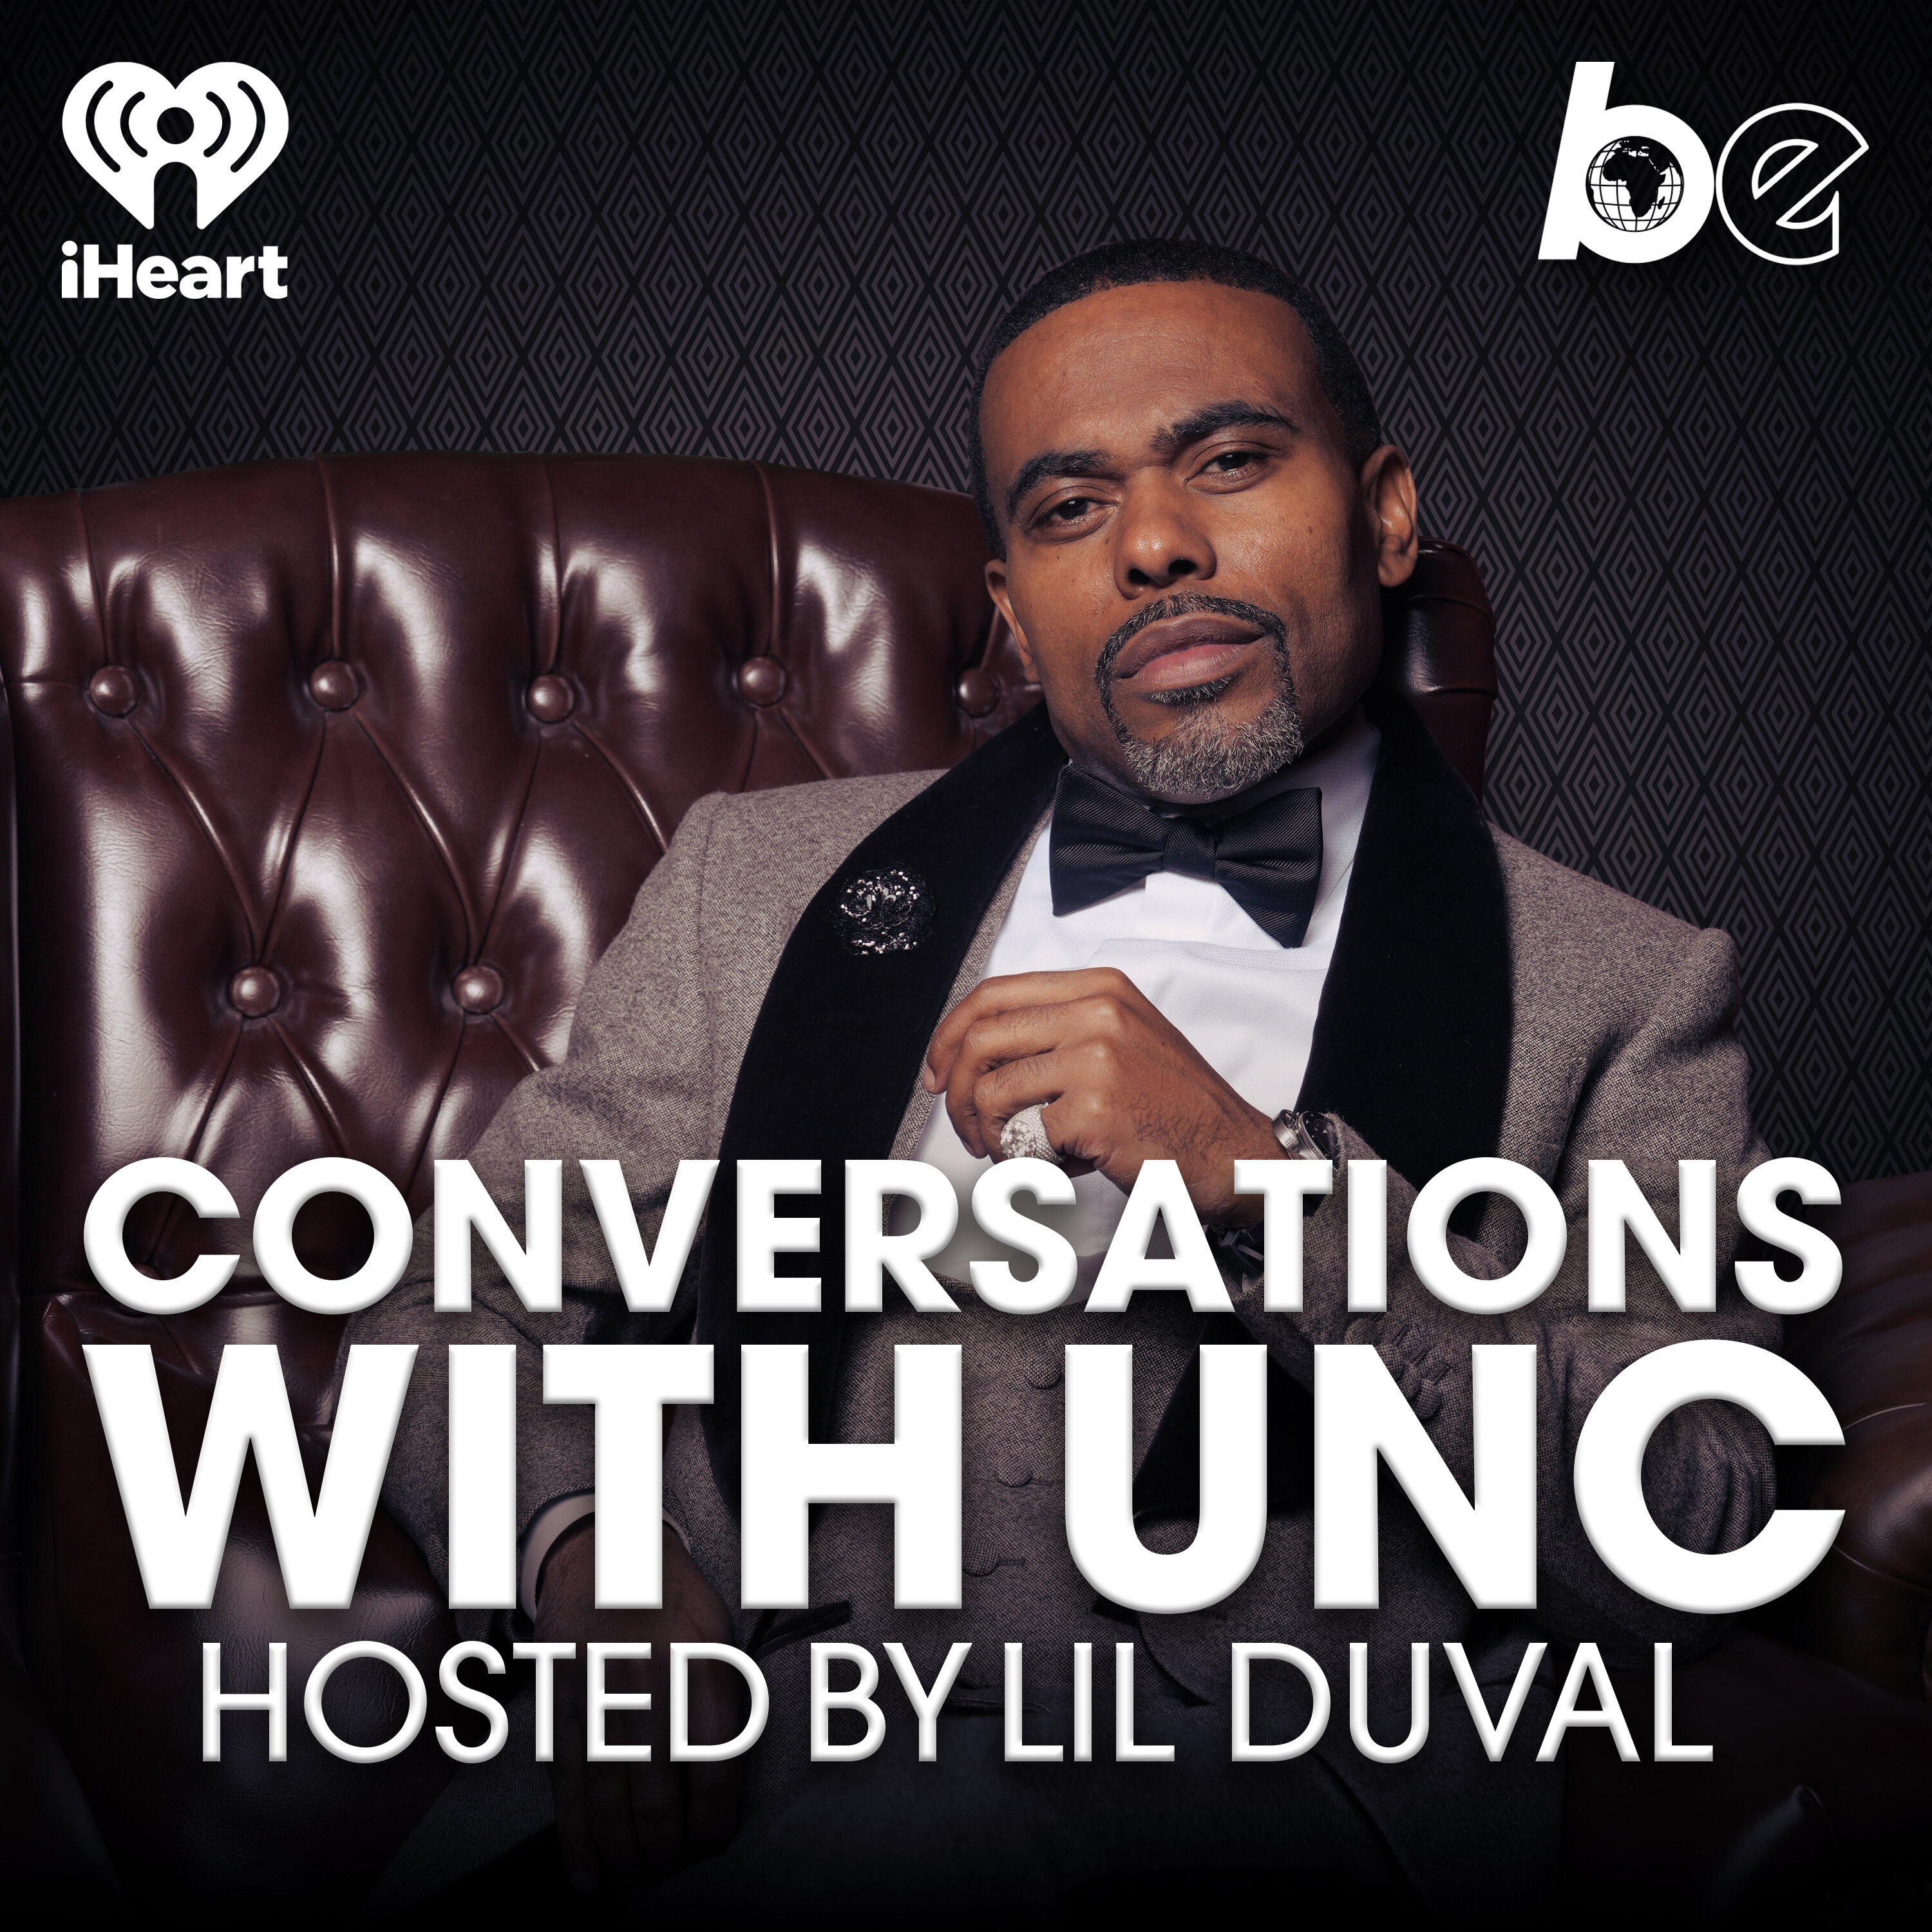 Conversations with Unc, Hosted by Lil Duval